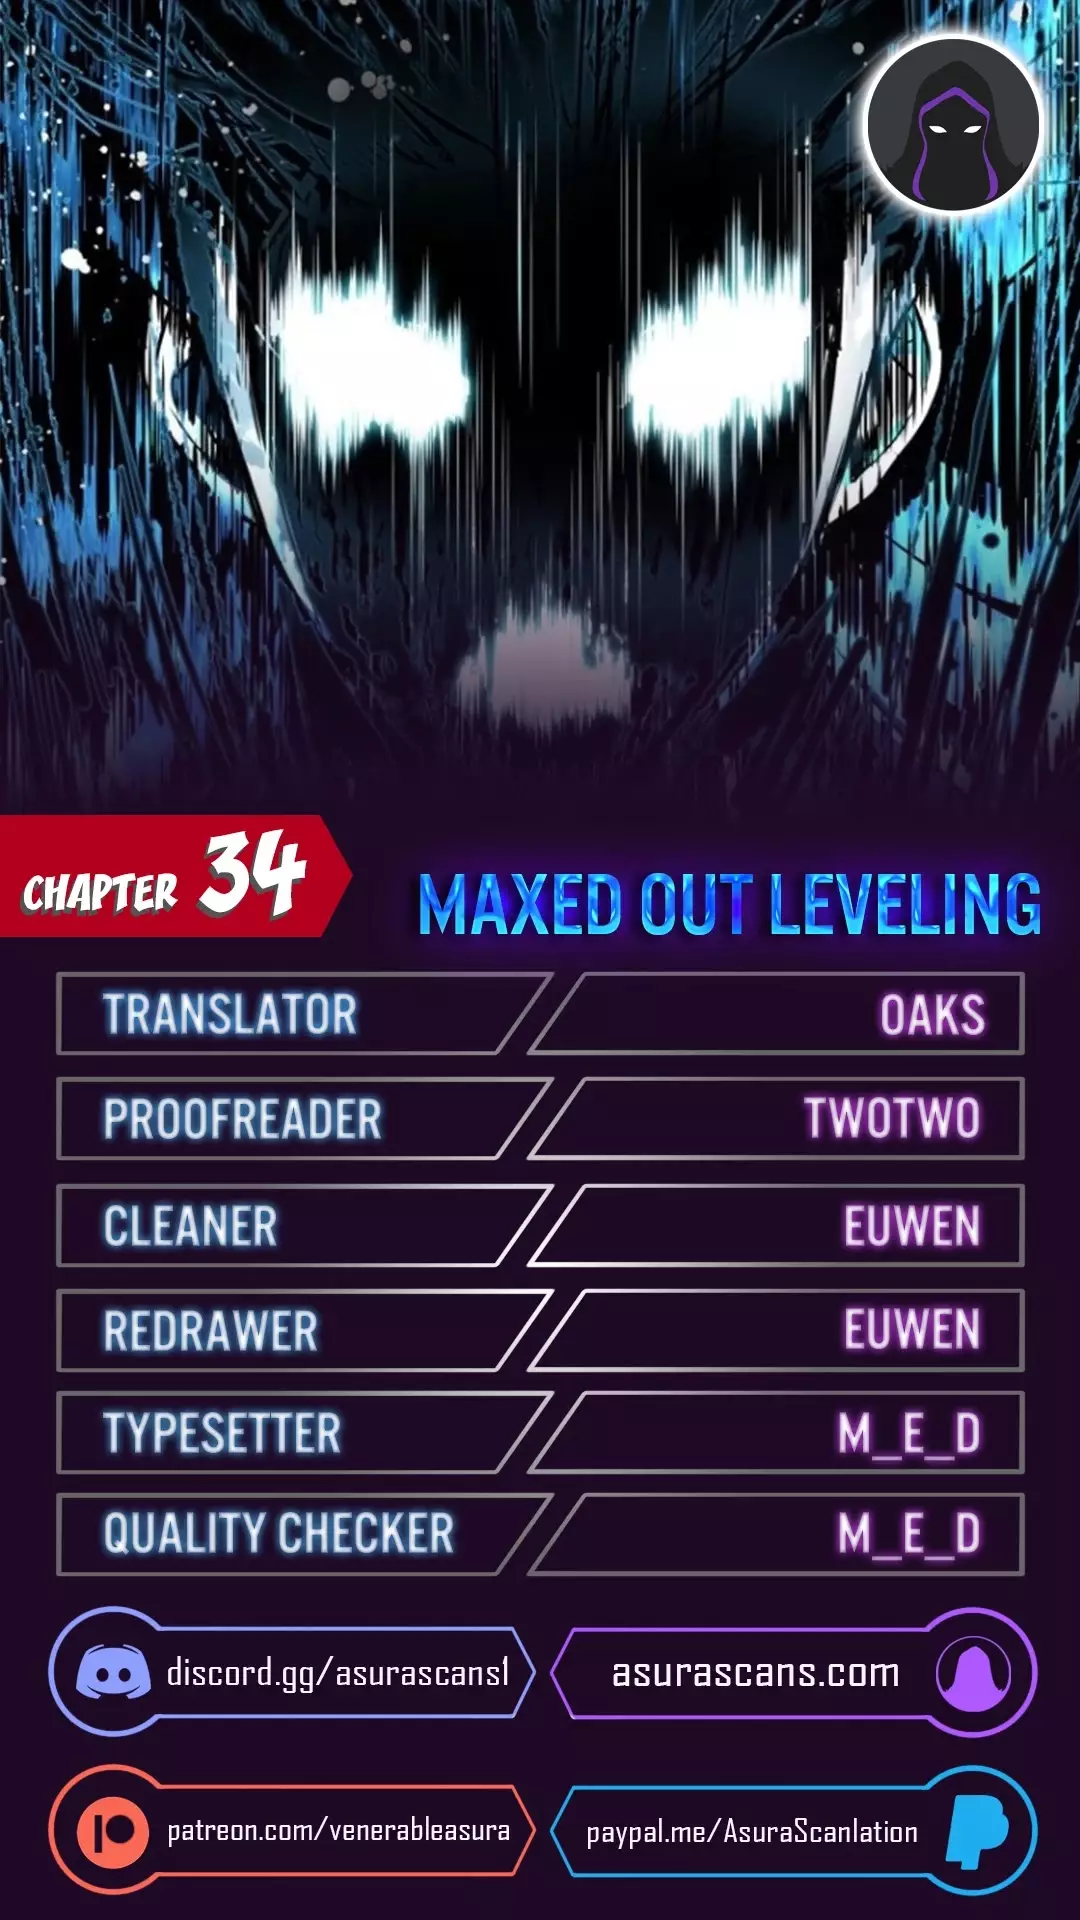 Maxed Out Leveling - 34 page 1-9662952c